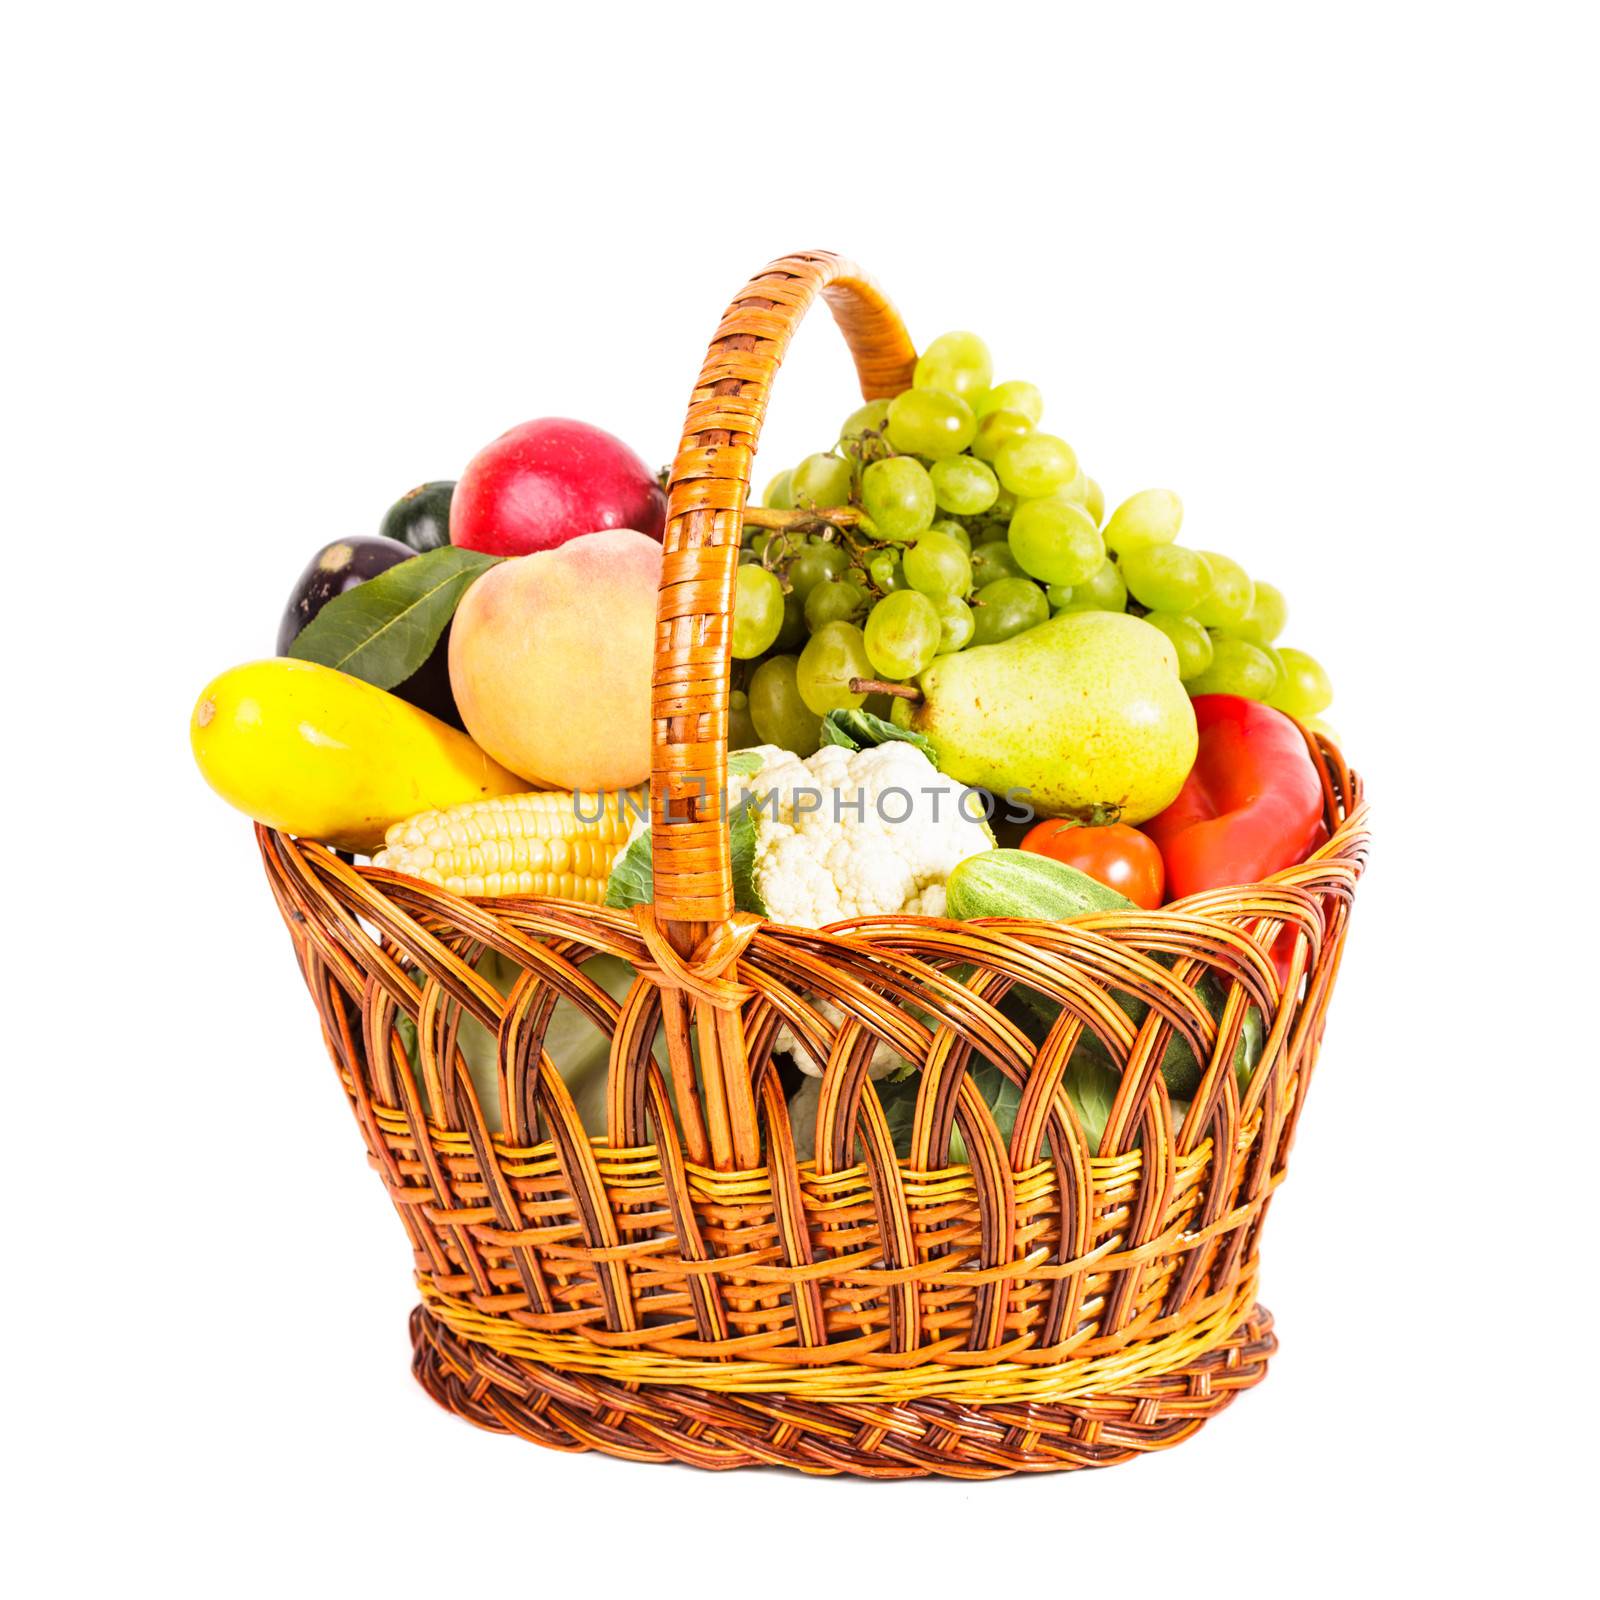 Basket of vegetables and fruits isolated on white